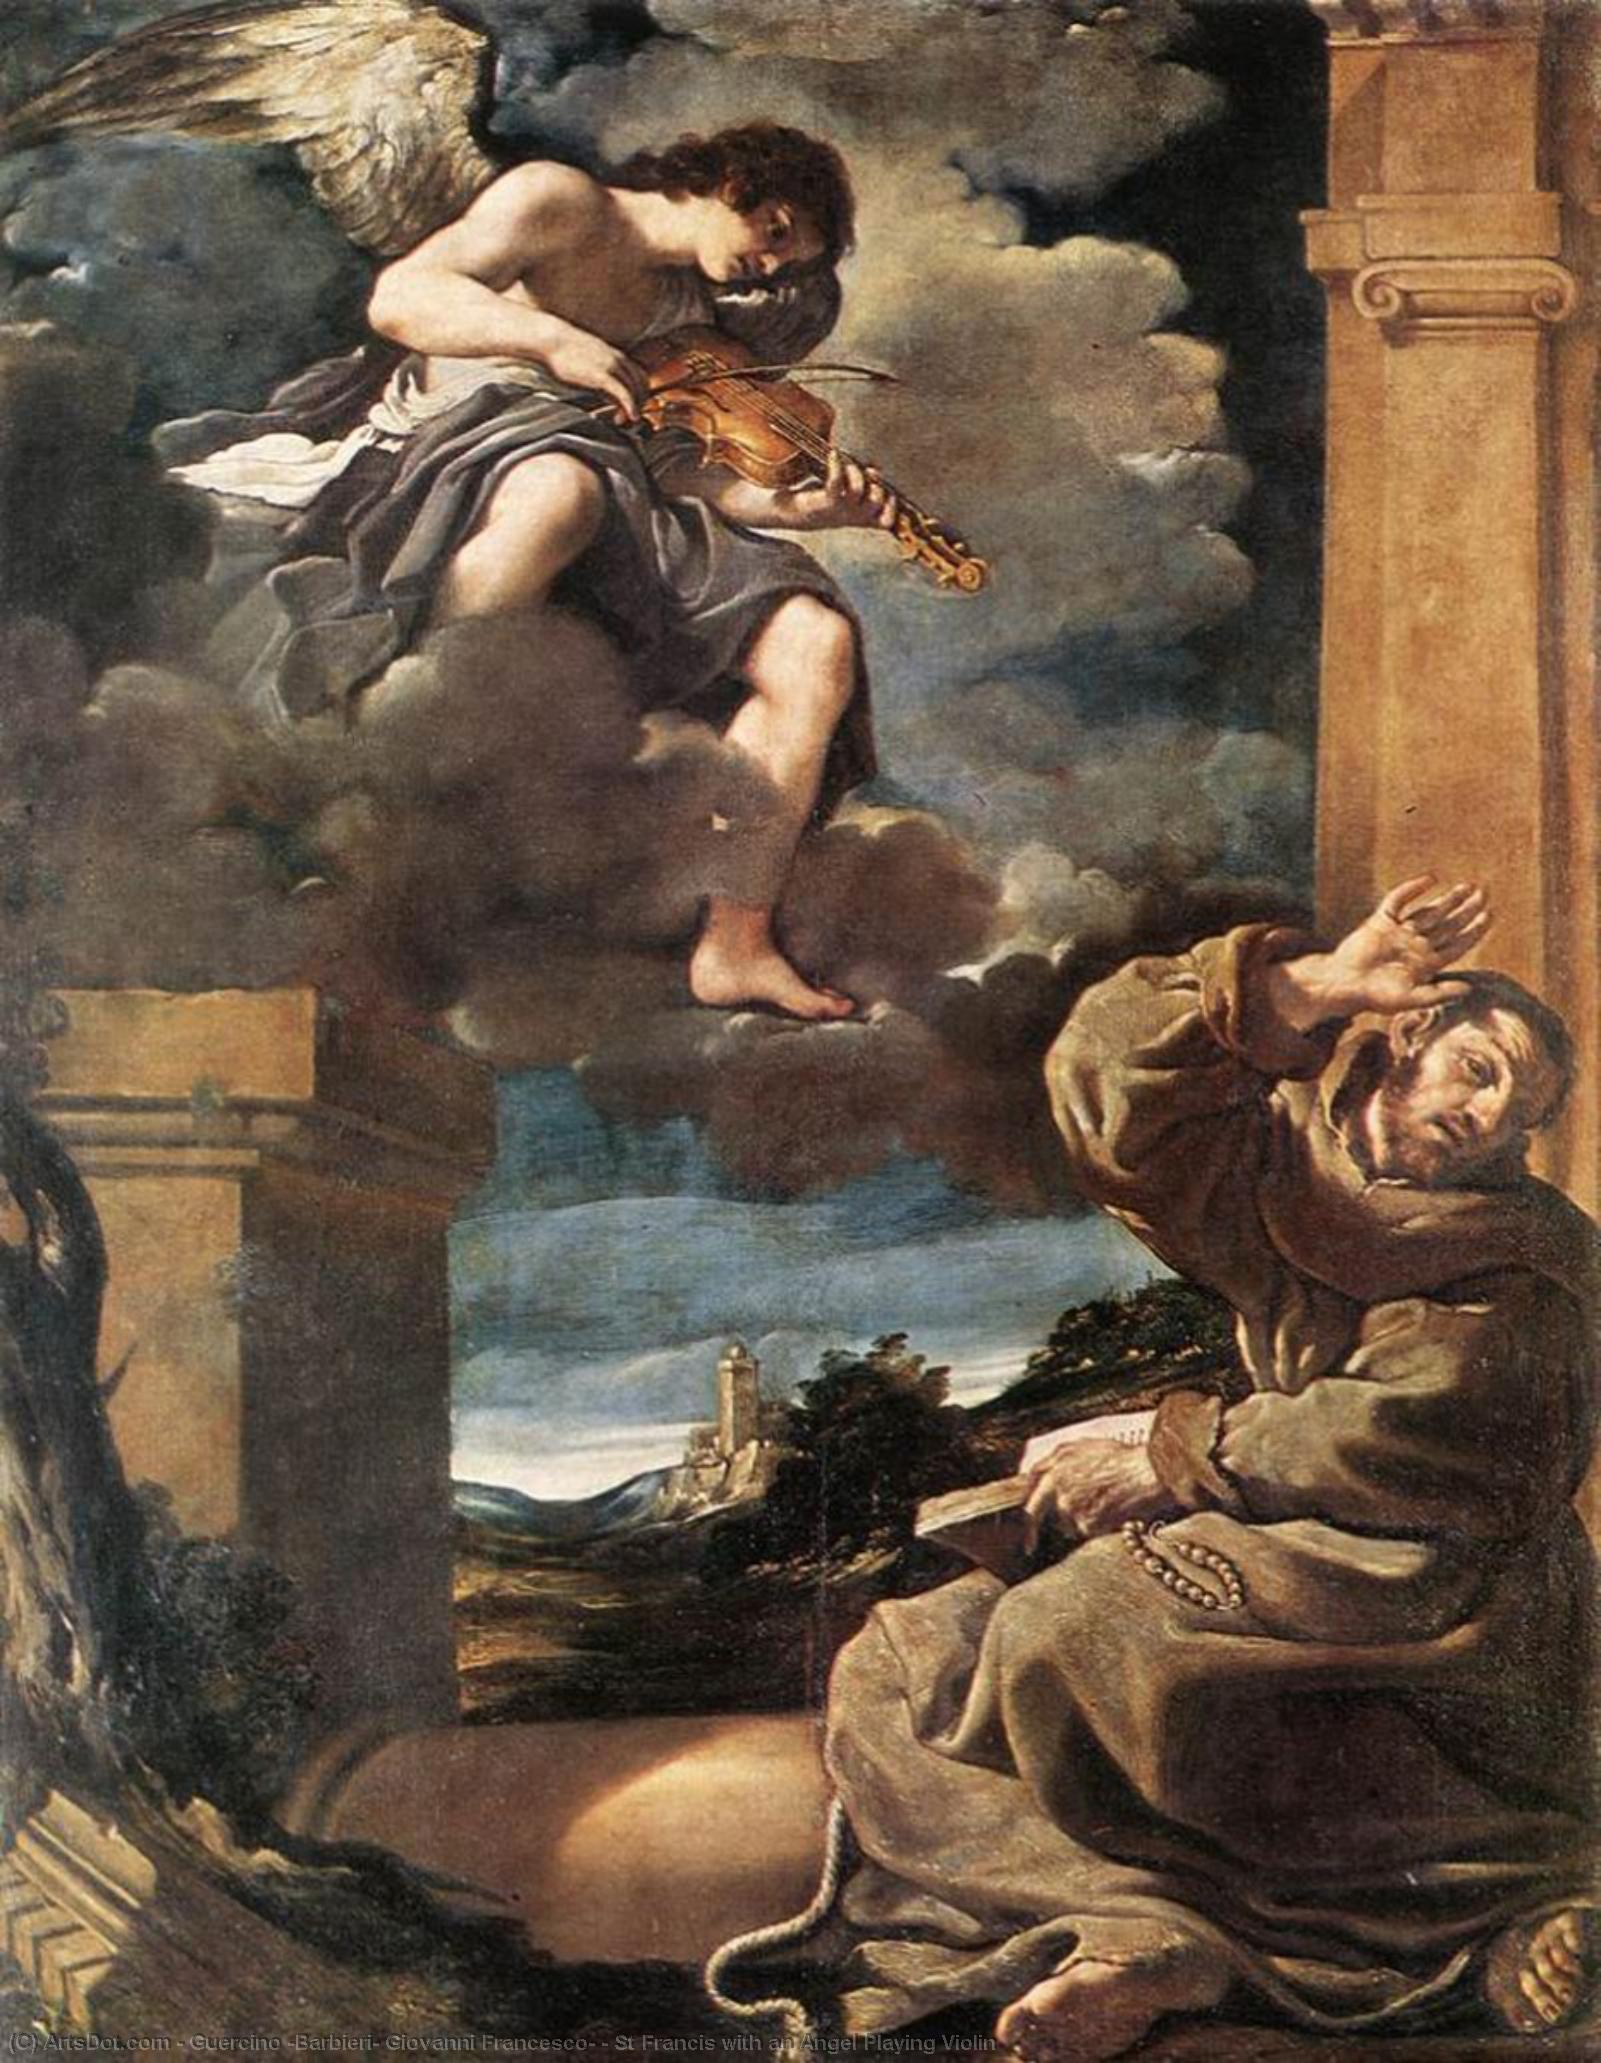 Buy Museum Art Reproductions St Francis with an Angel Playing Violin by Guercino (Barbieri, Giovanni Francesco) (1591-1666, Italy) | ArtsDot.com